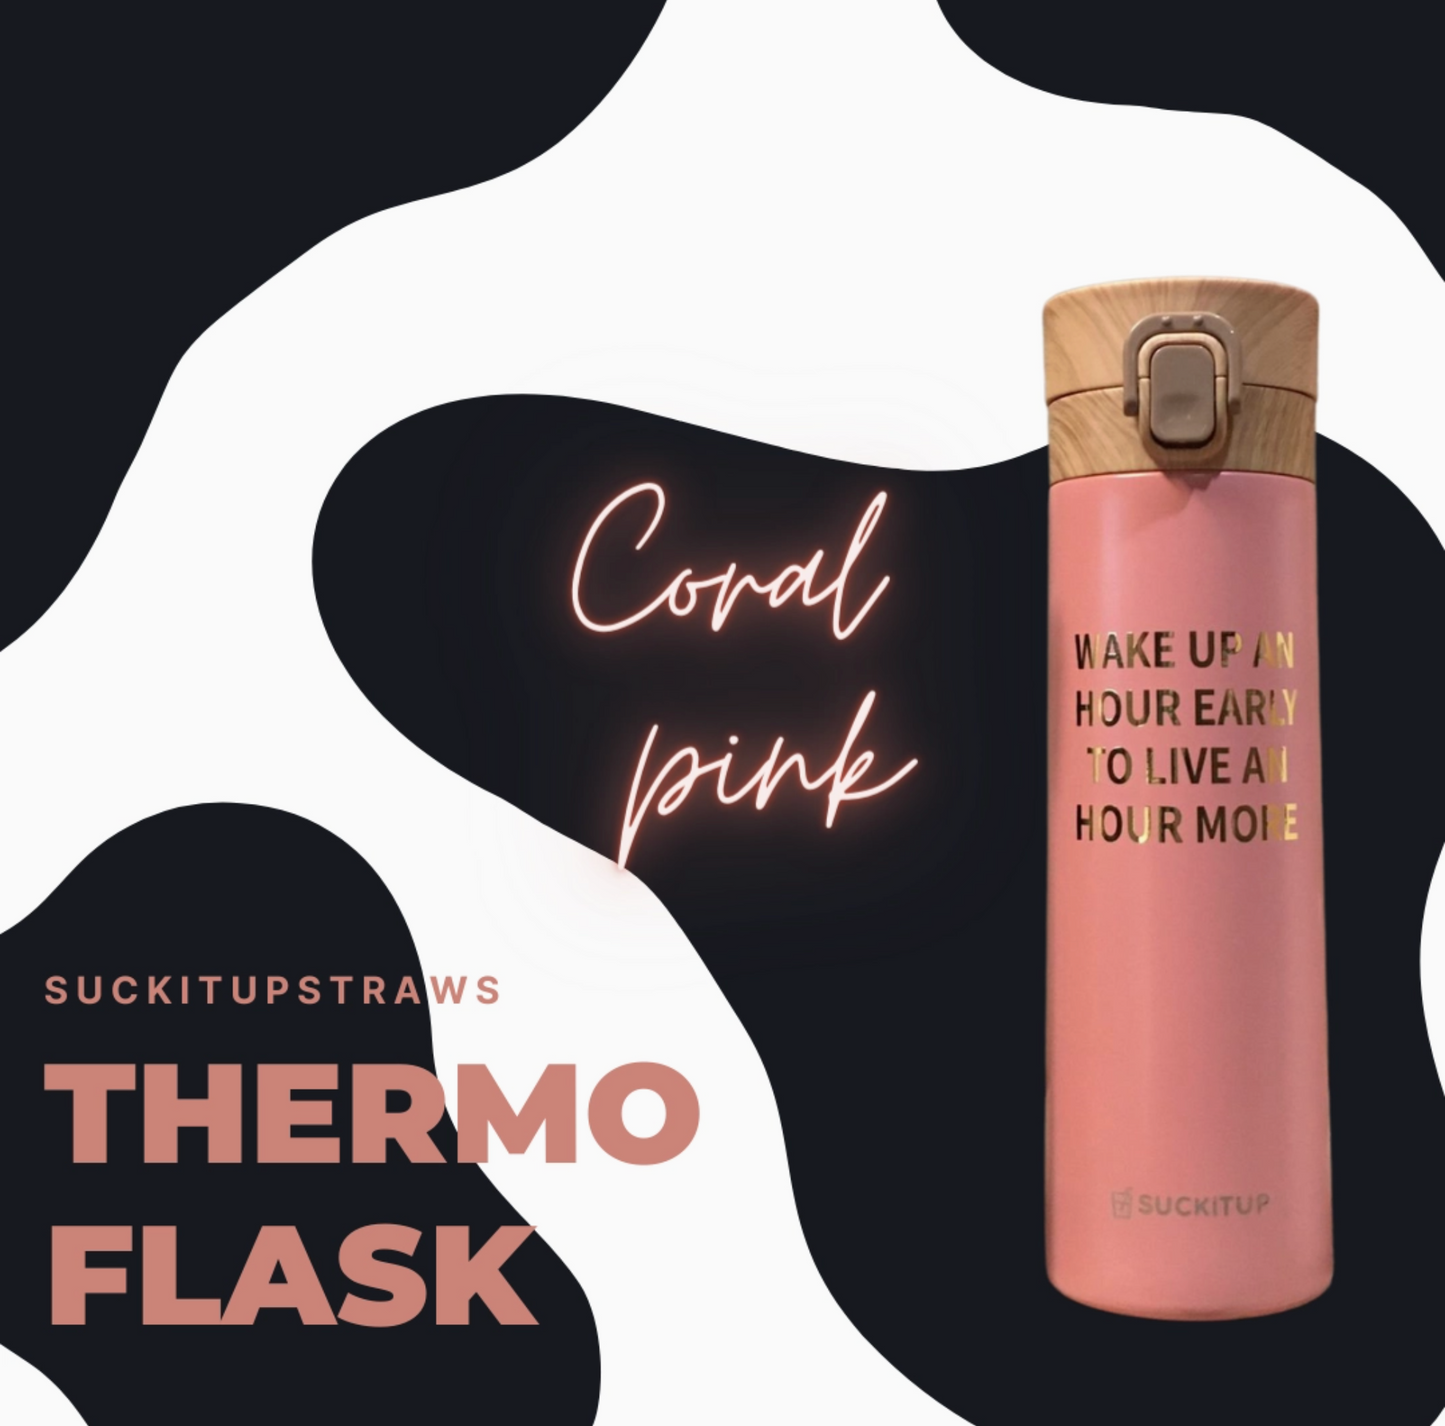 Thermo Flask - Wake up and hour early to live an hour more